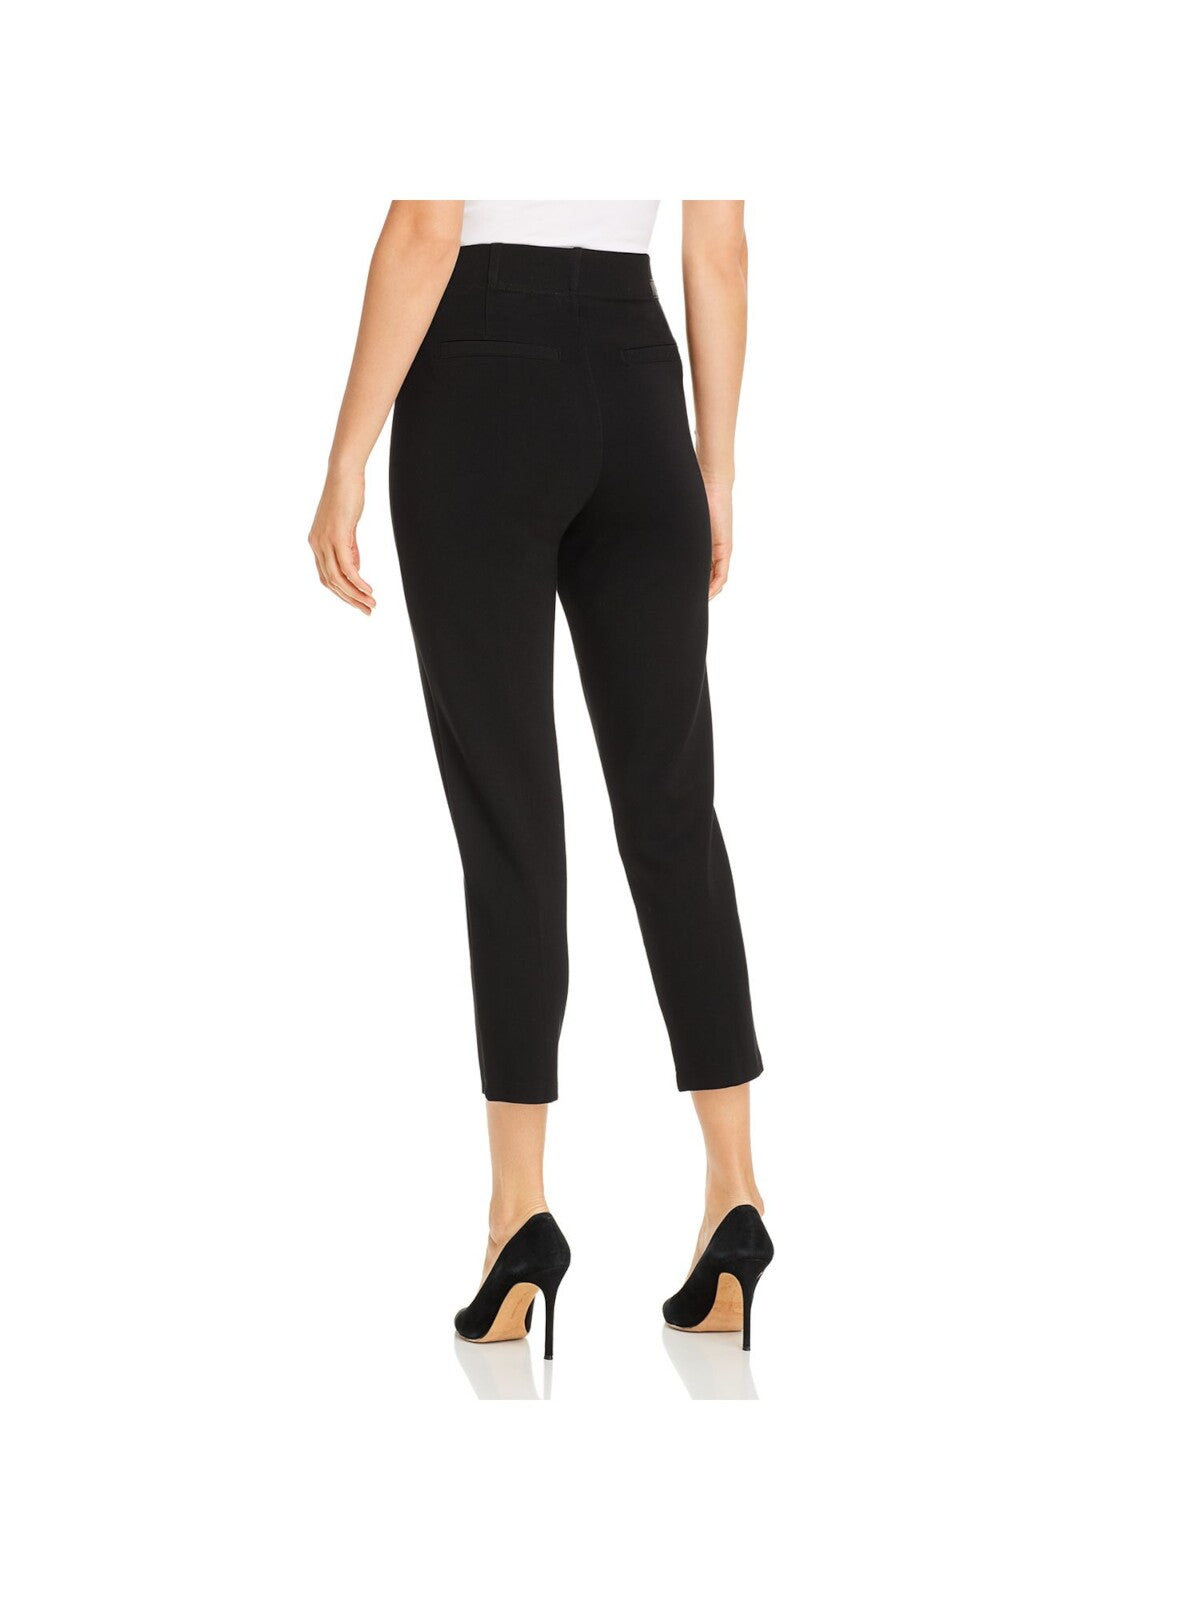 JAG Womens Black Pocketed Front Seam Ankle Evening Leggings XS